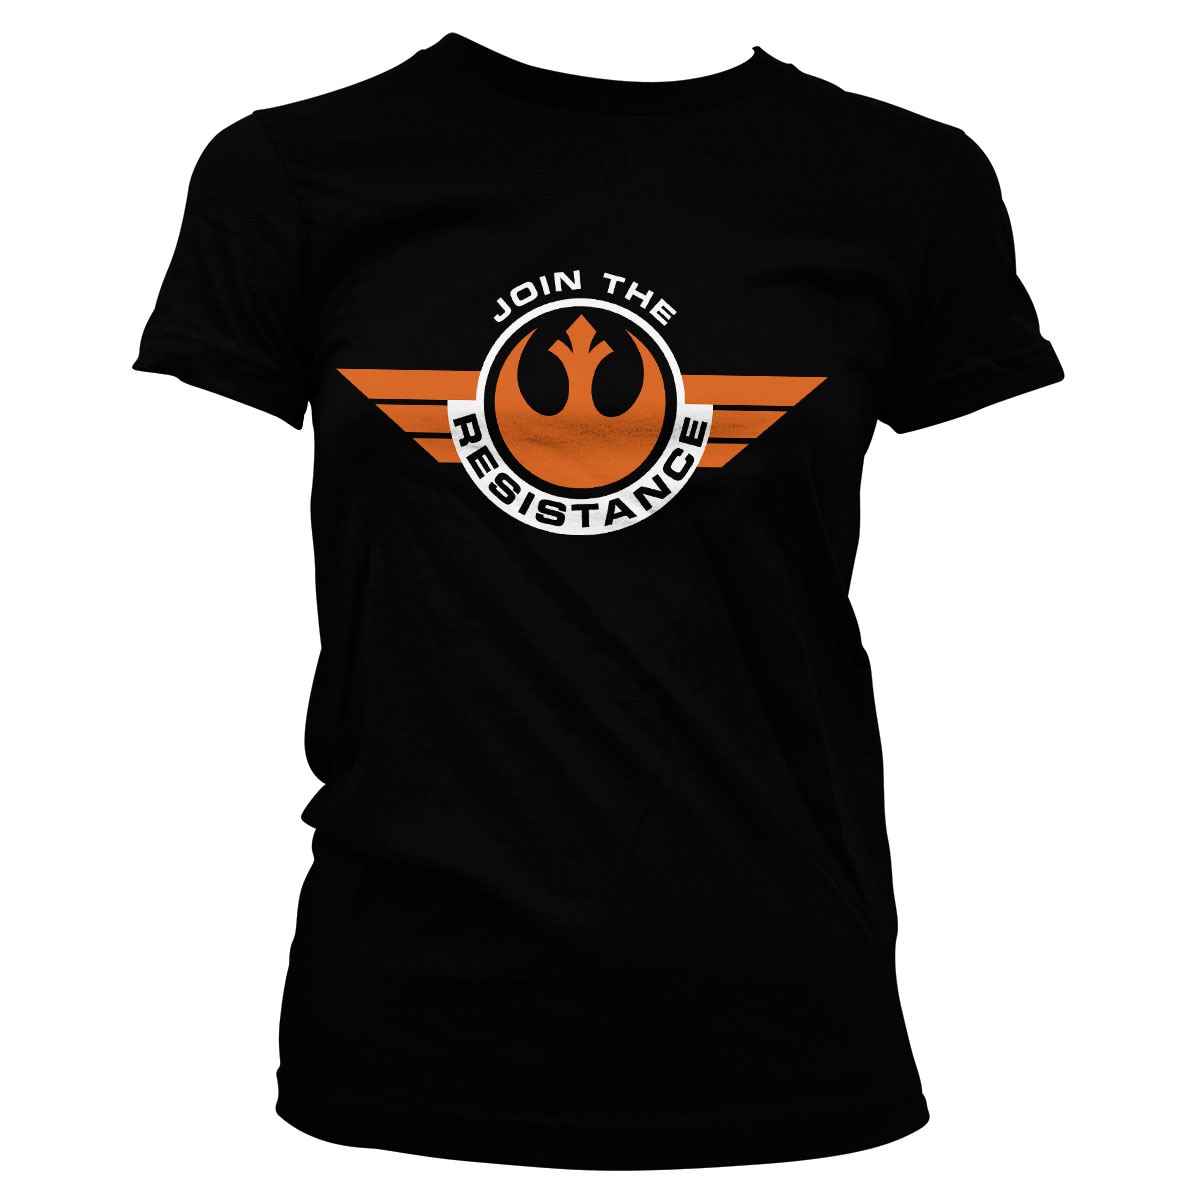 Join The Resistance Girly Tee